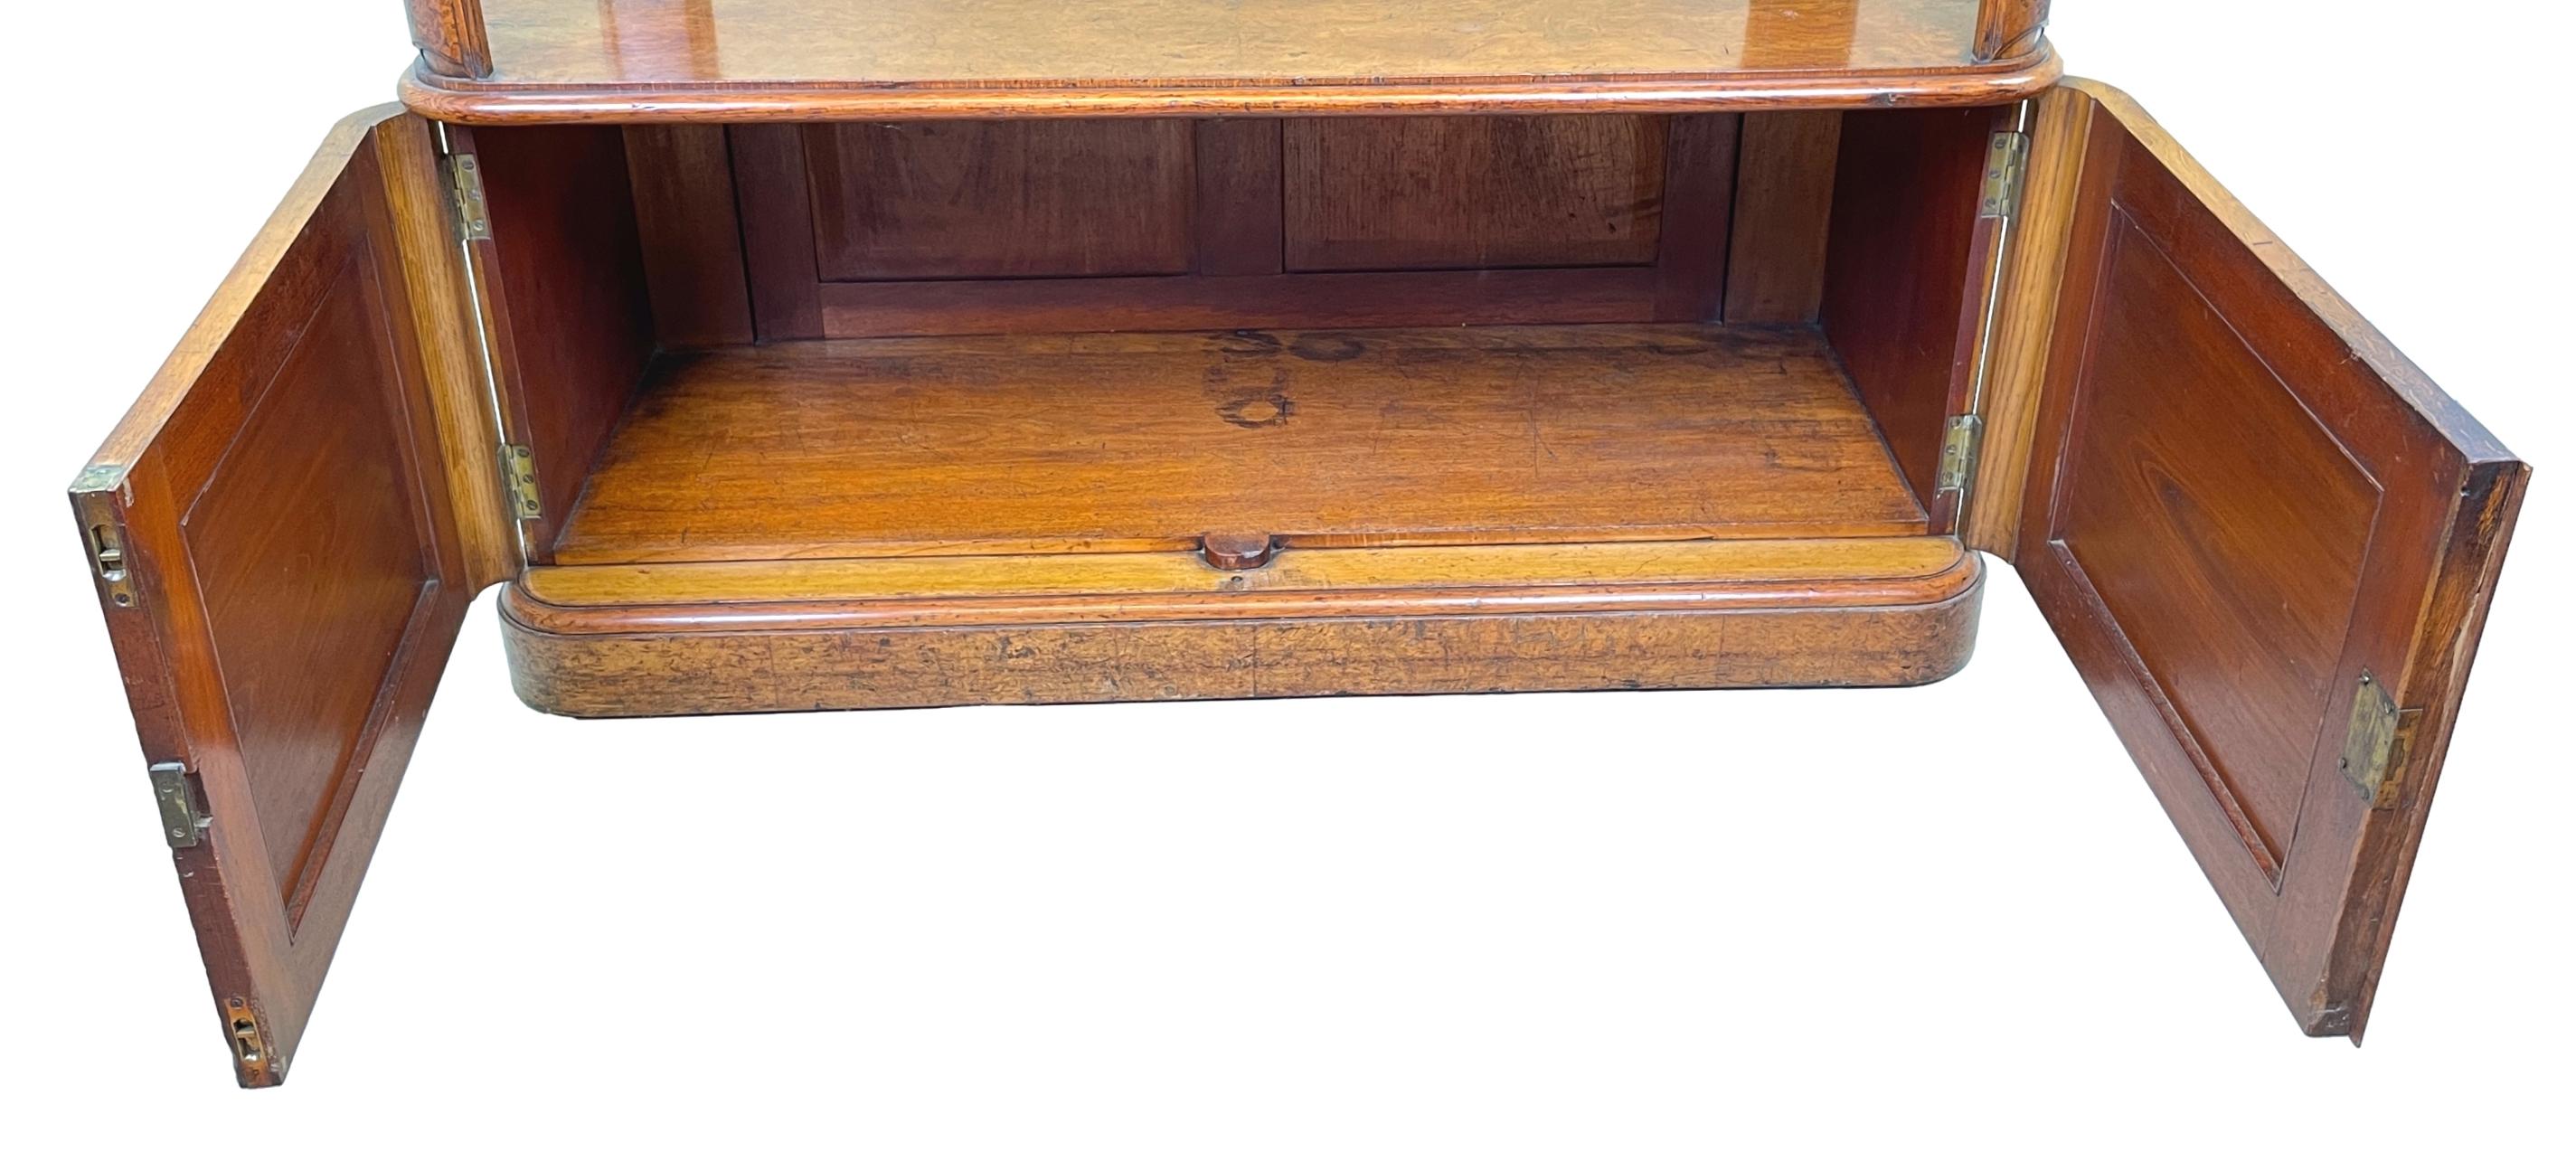 Mid 19th Century Burr Oak Buffet Cupboard In Good Condition For Sale In Bedfordshire, GB